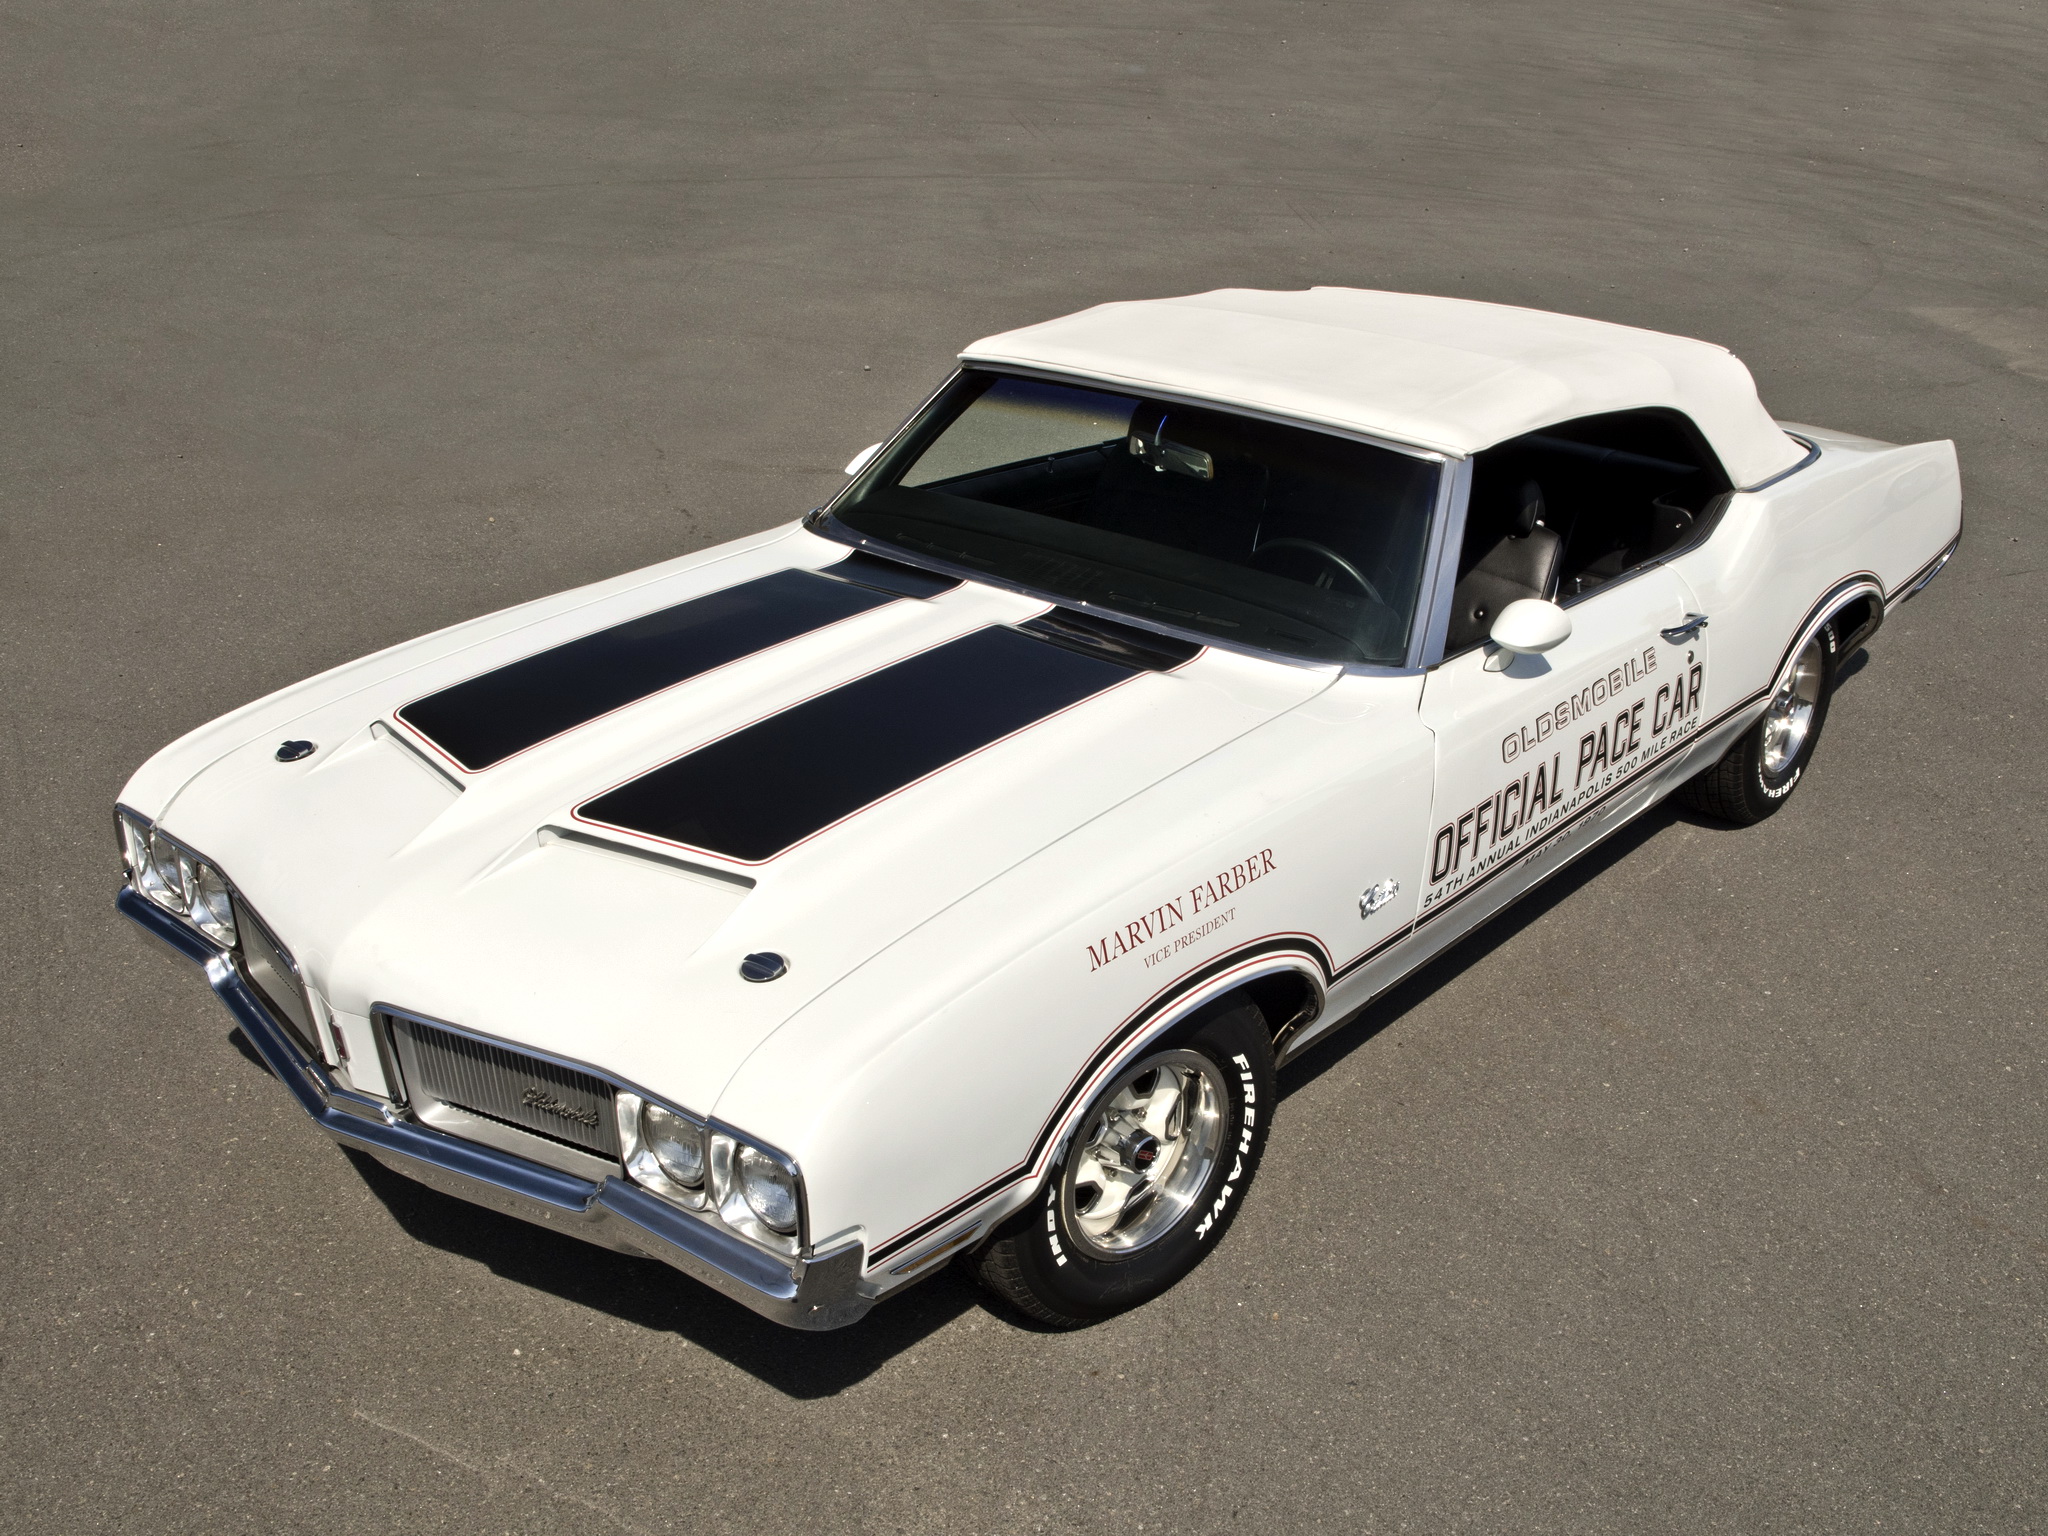 1970, Oldsmobile, Cutlass, Supreme, Convertible, Indy, 500, Pace, 4267, Muscle, Classic, Race, Racing, Hg Wallpaper